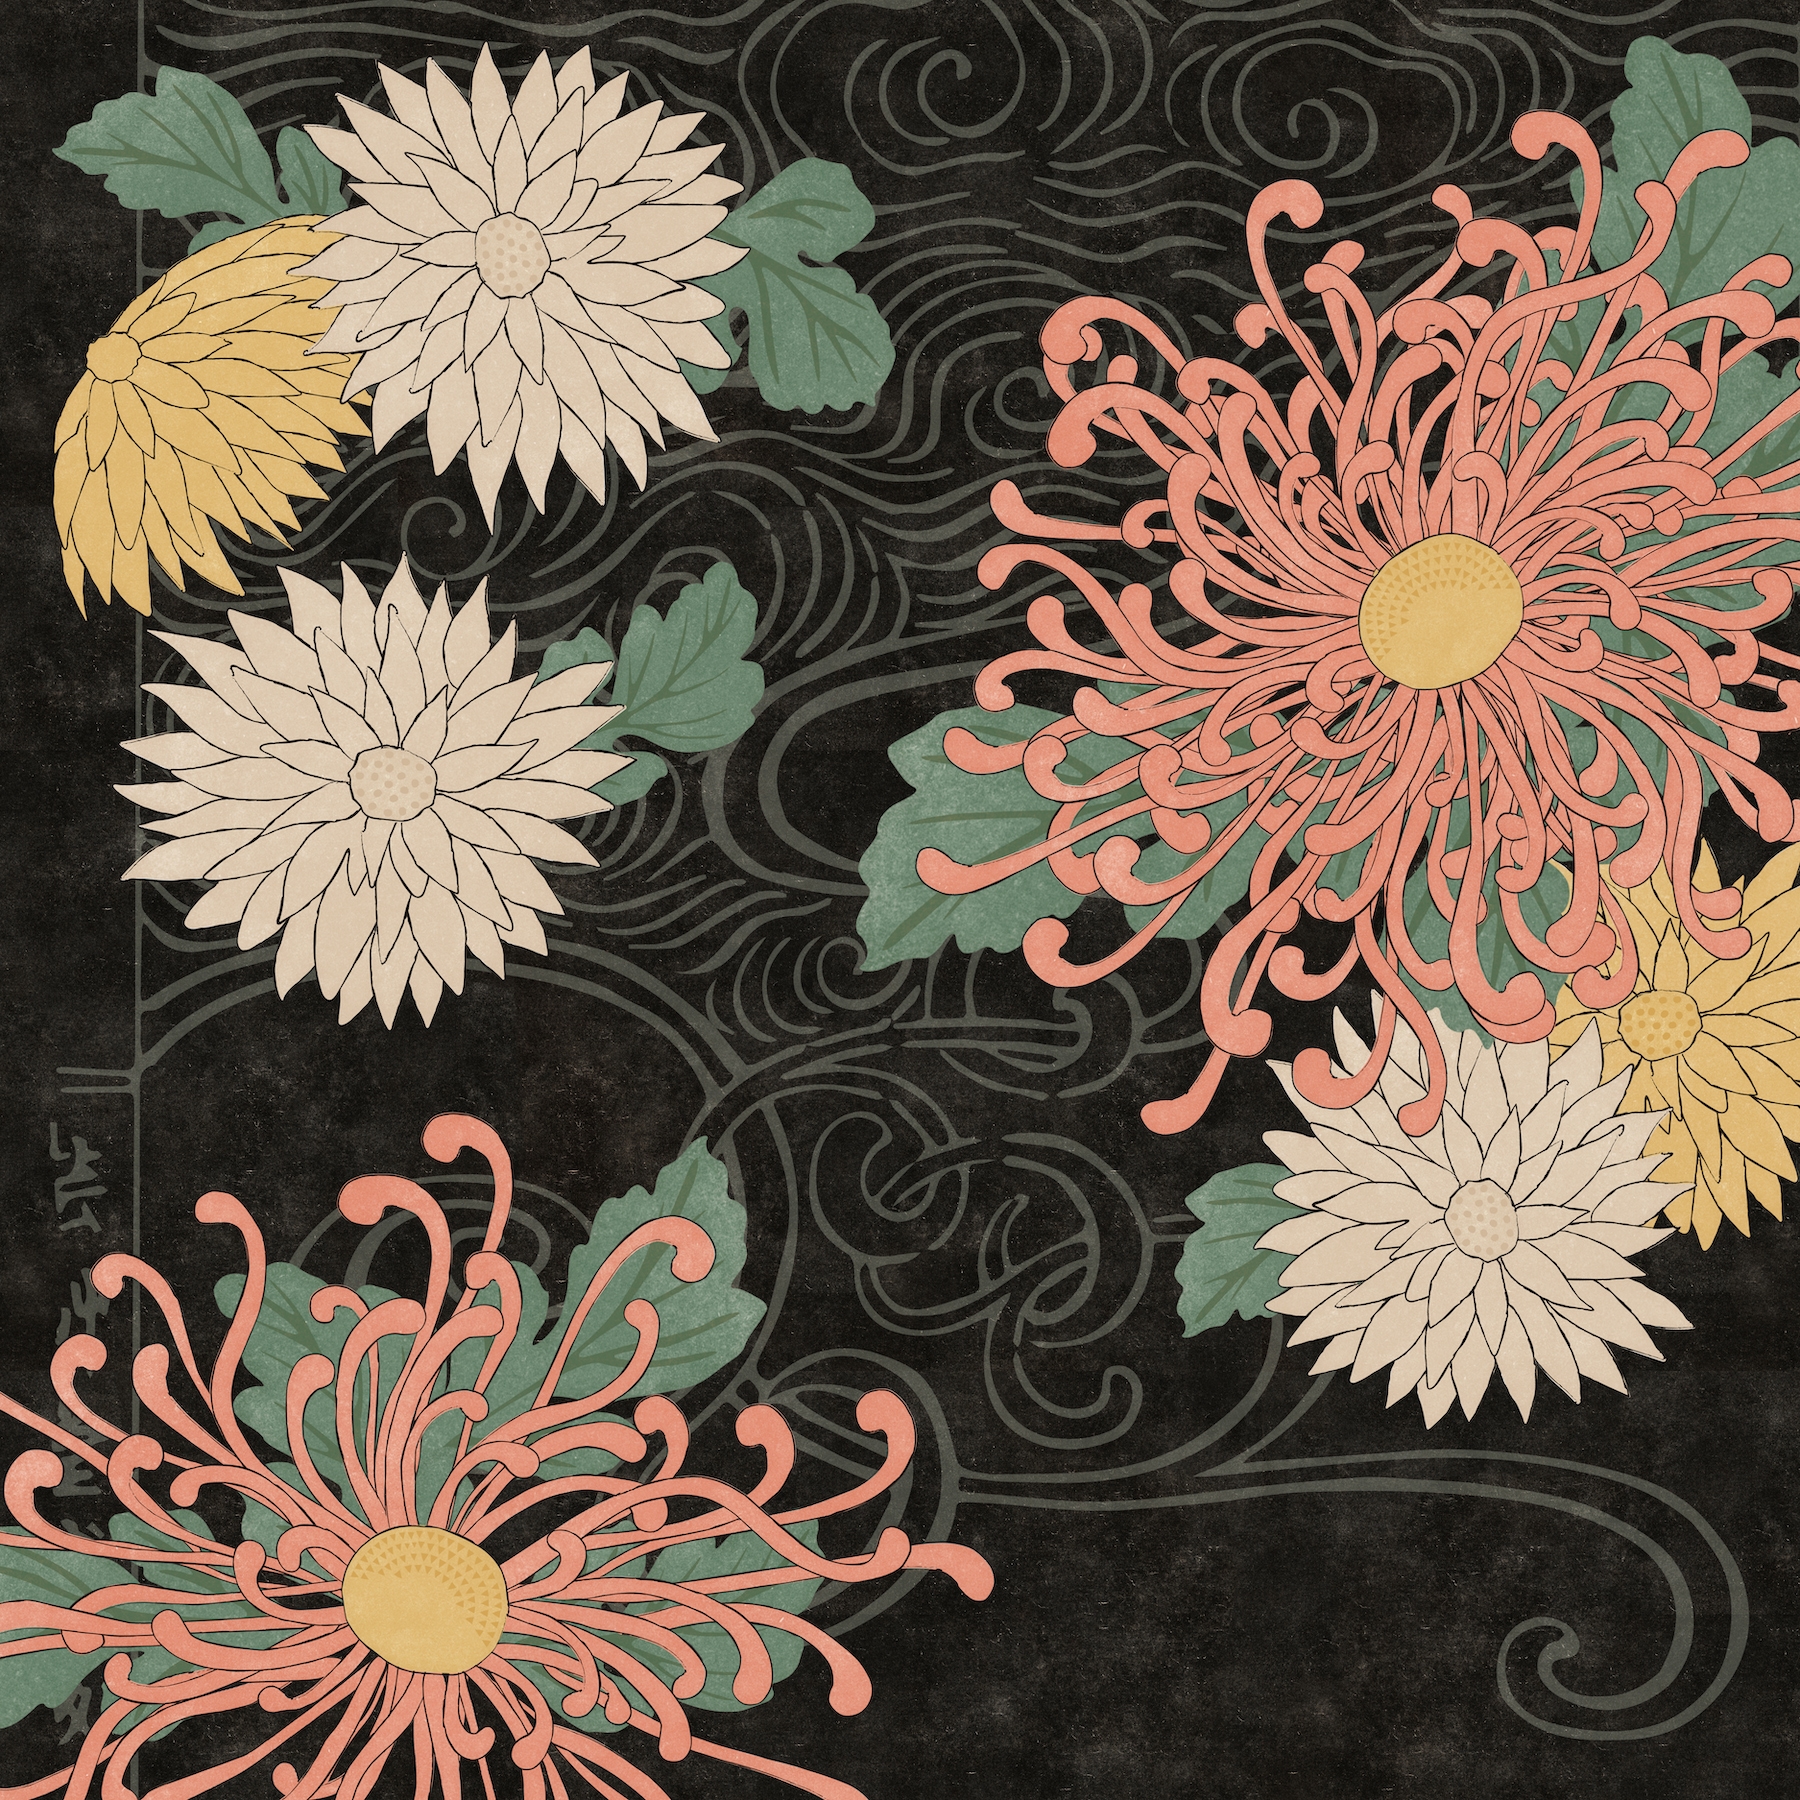 Traditional Japanese Floral Wallpaper, Large Chrysanthemum Print, Authentic Japanese Flower Wall Design